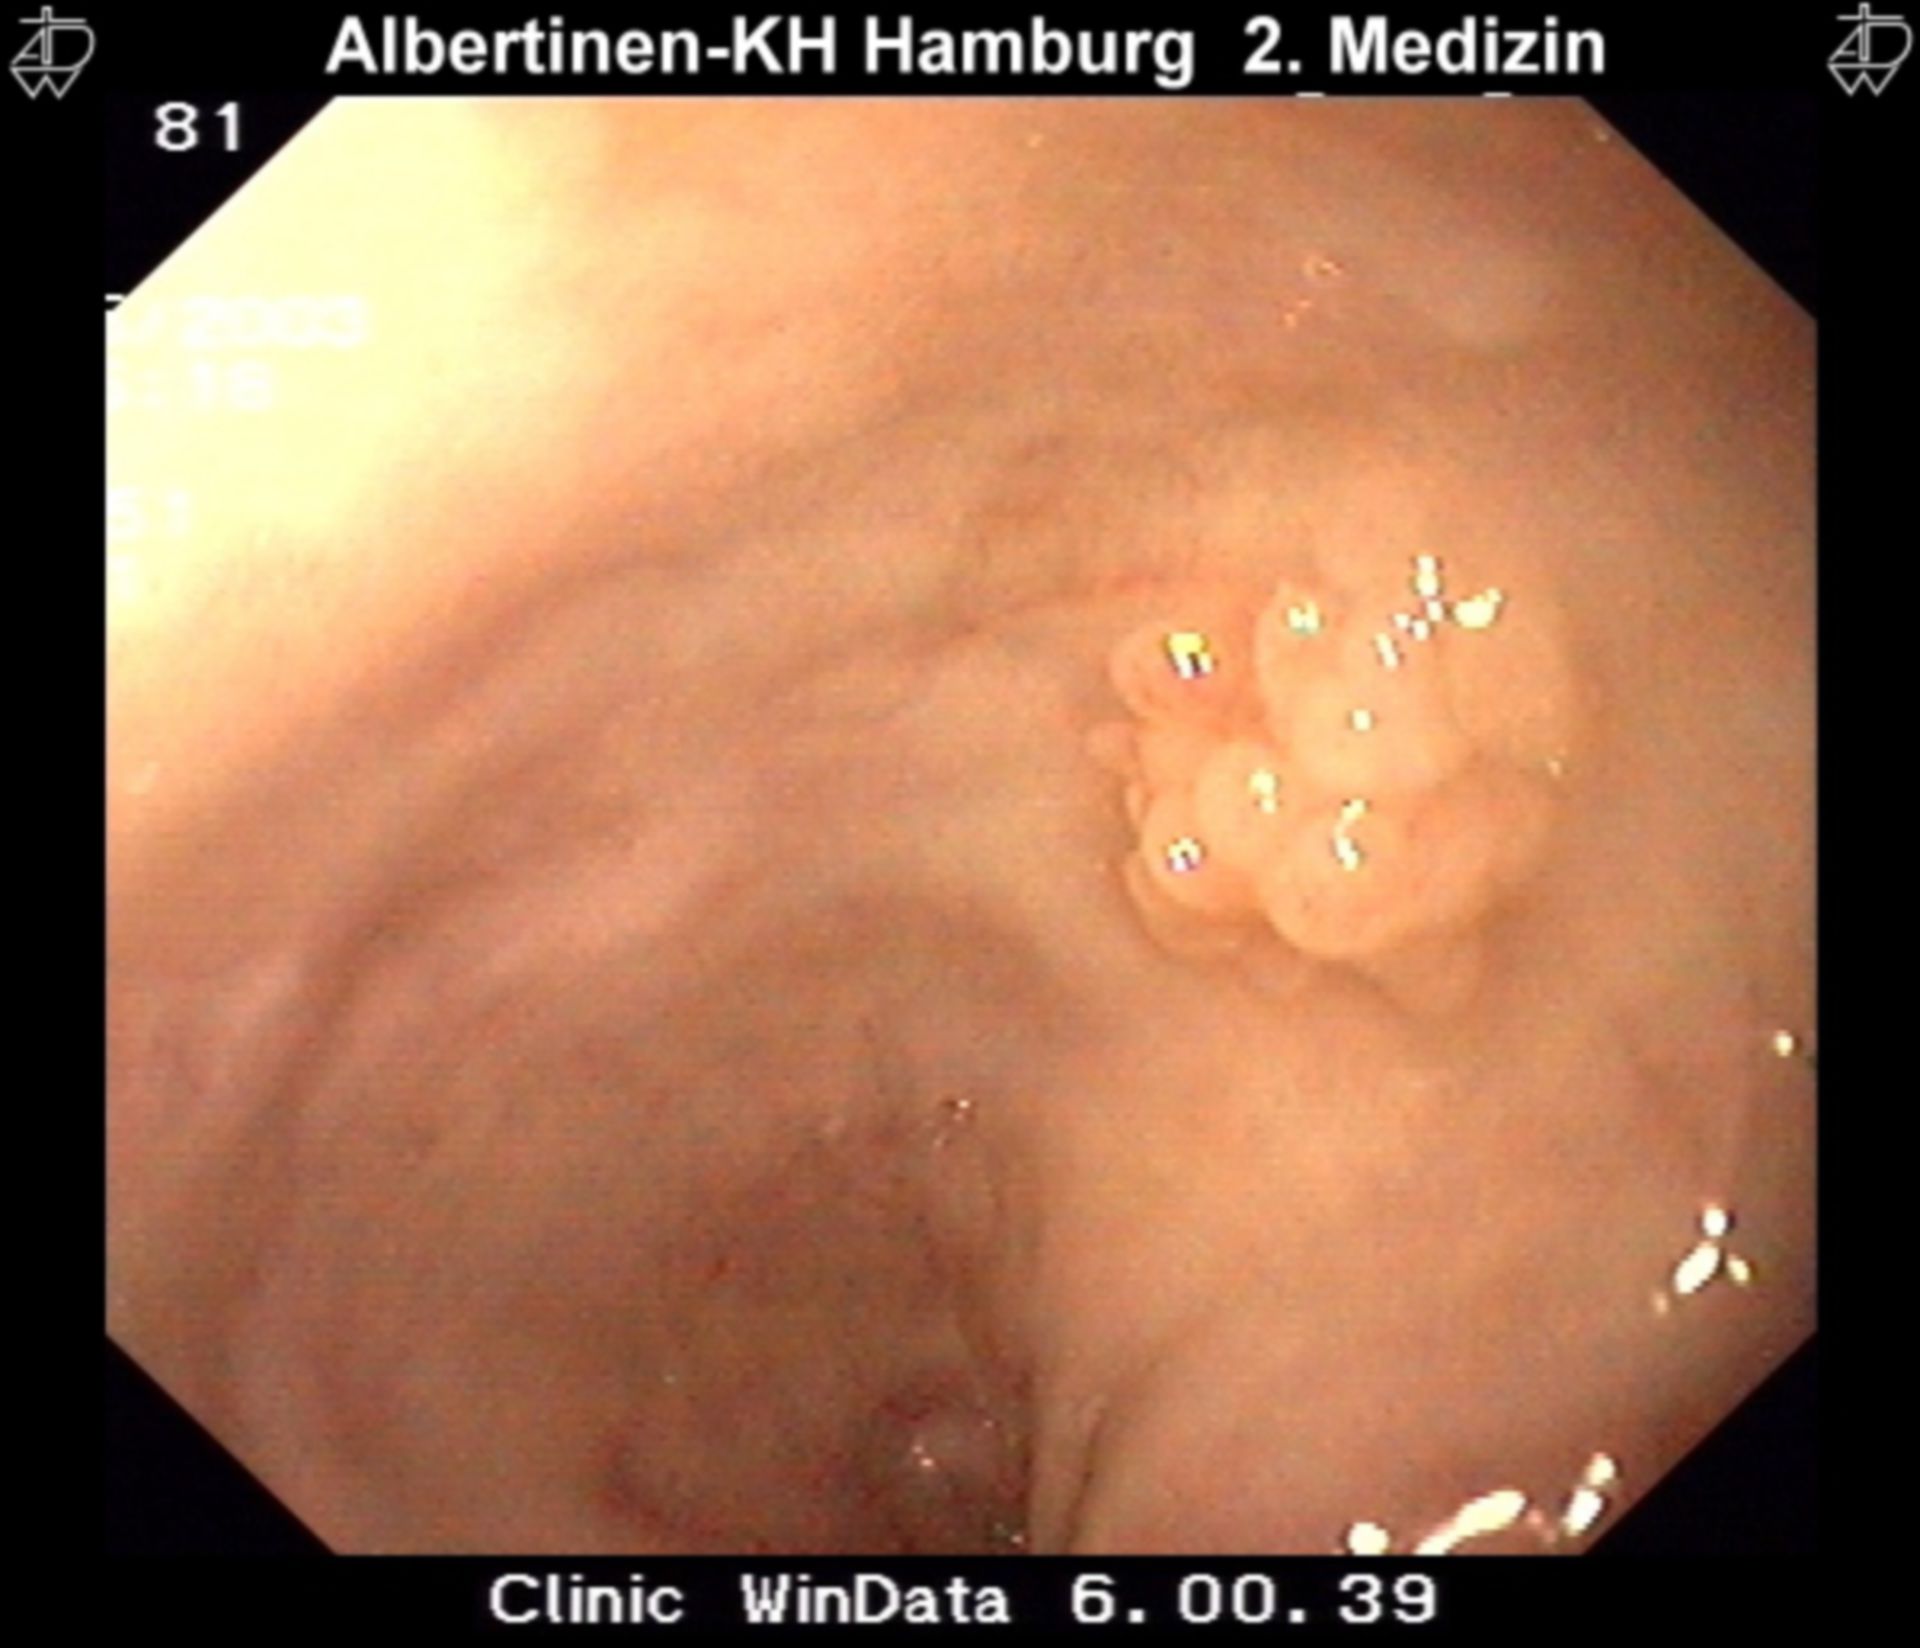 Polyp in the esophagus